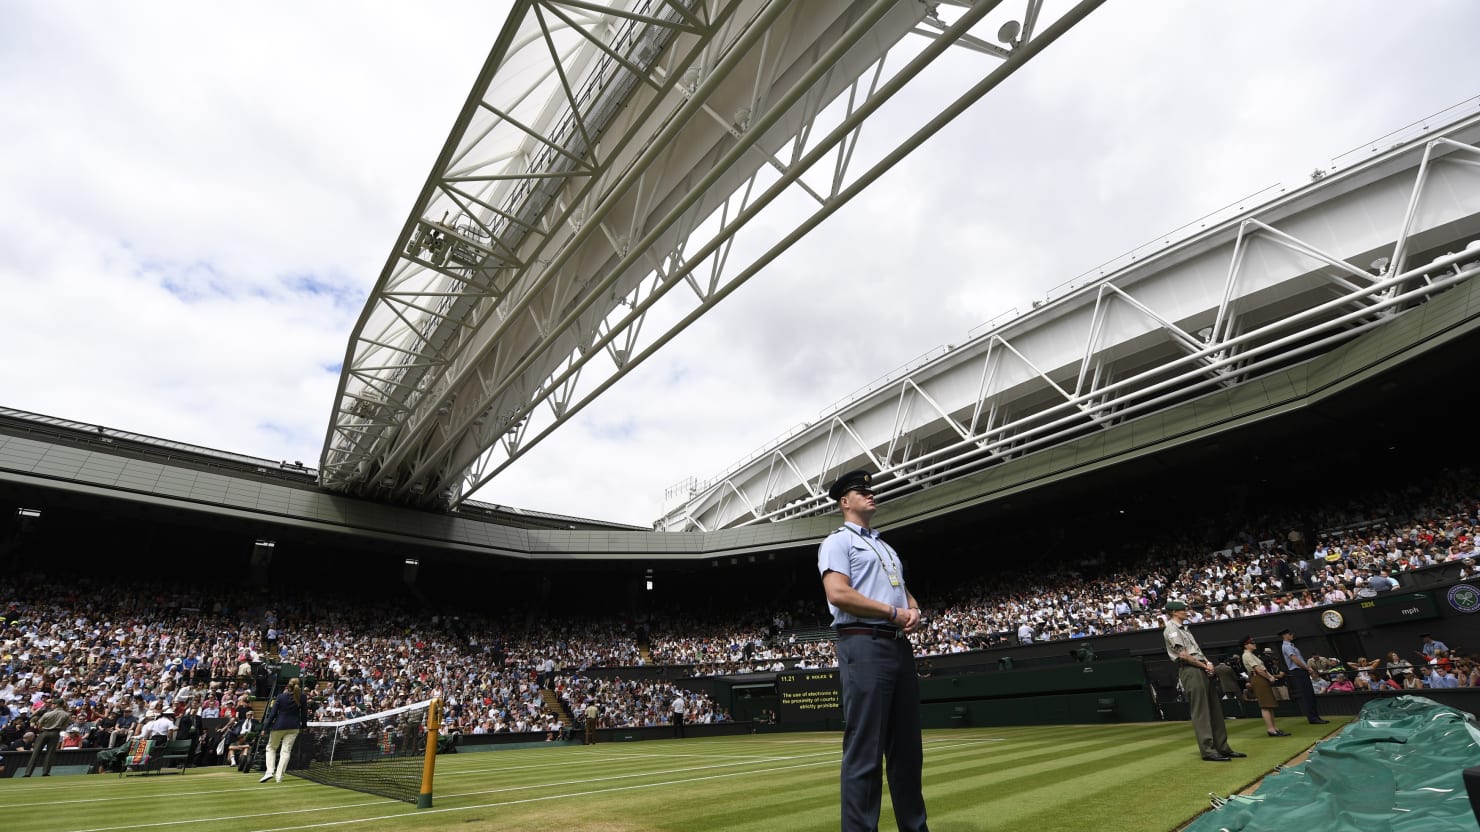 Wimbledon Will Allow Russian and Belarusian Players to Compete This Year